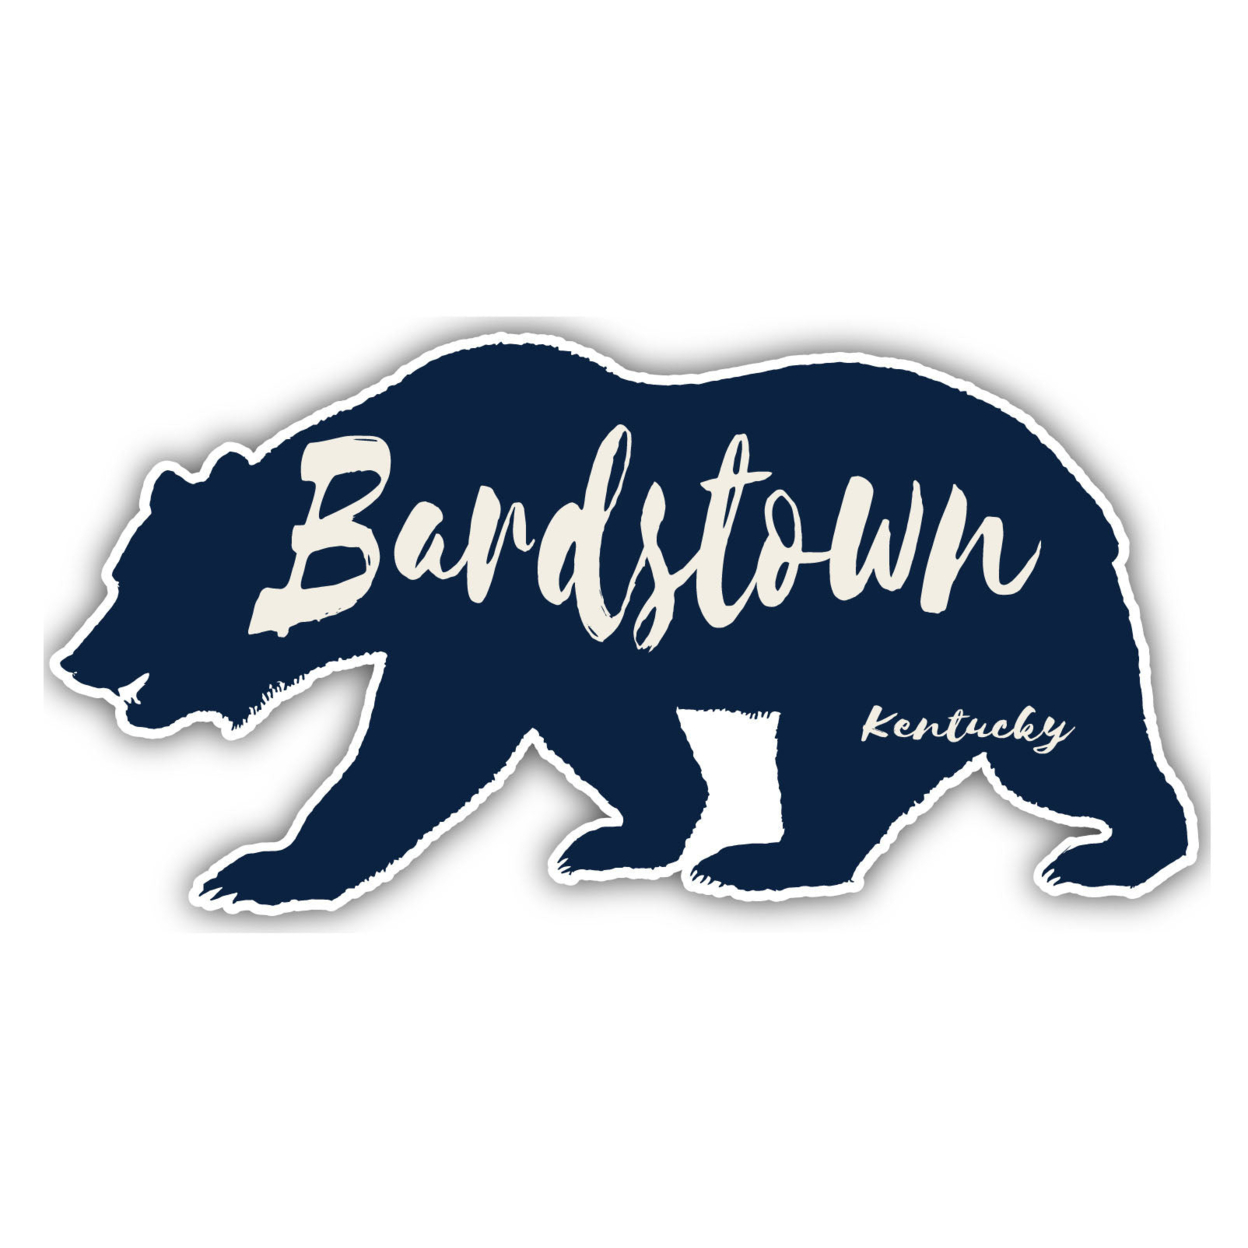 Bardstown Kentucky Souvenir Decorative Stickers (Choose Theme And Size) - Single Unit, 6-Inch, Great Outdoors